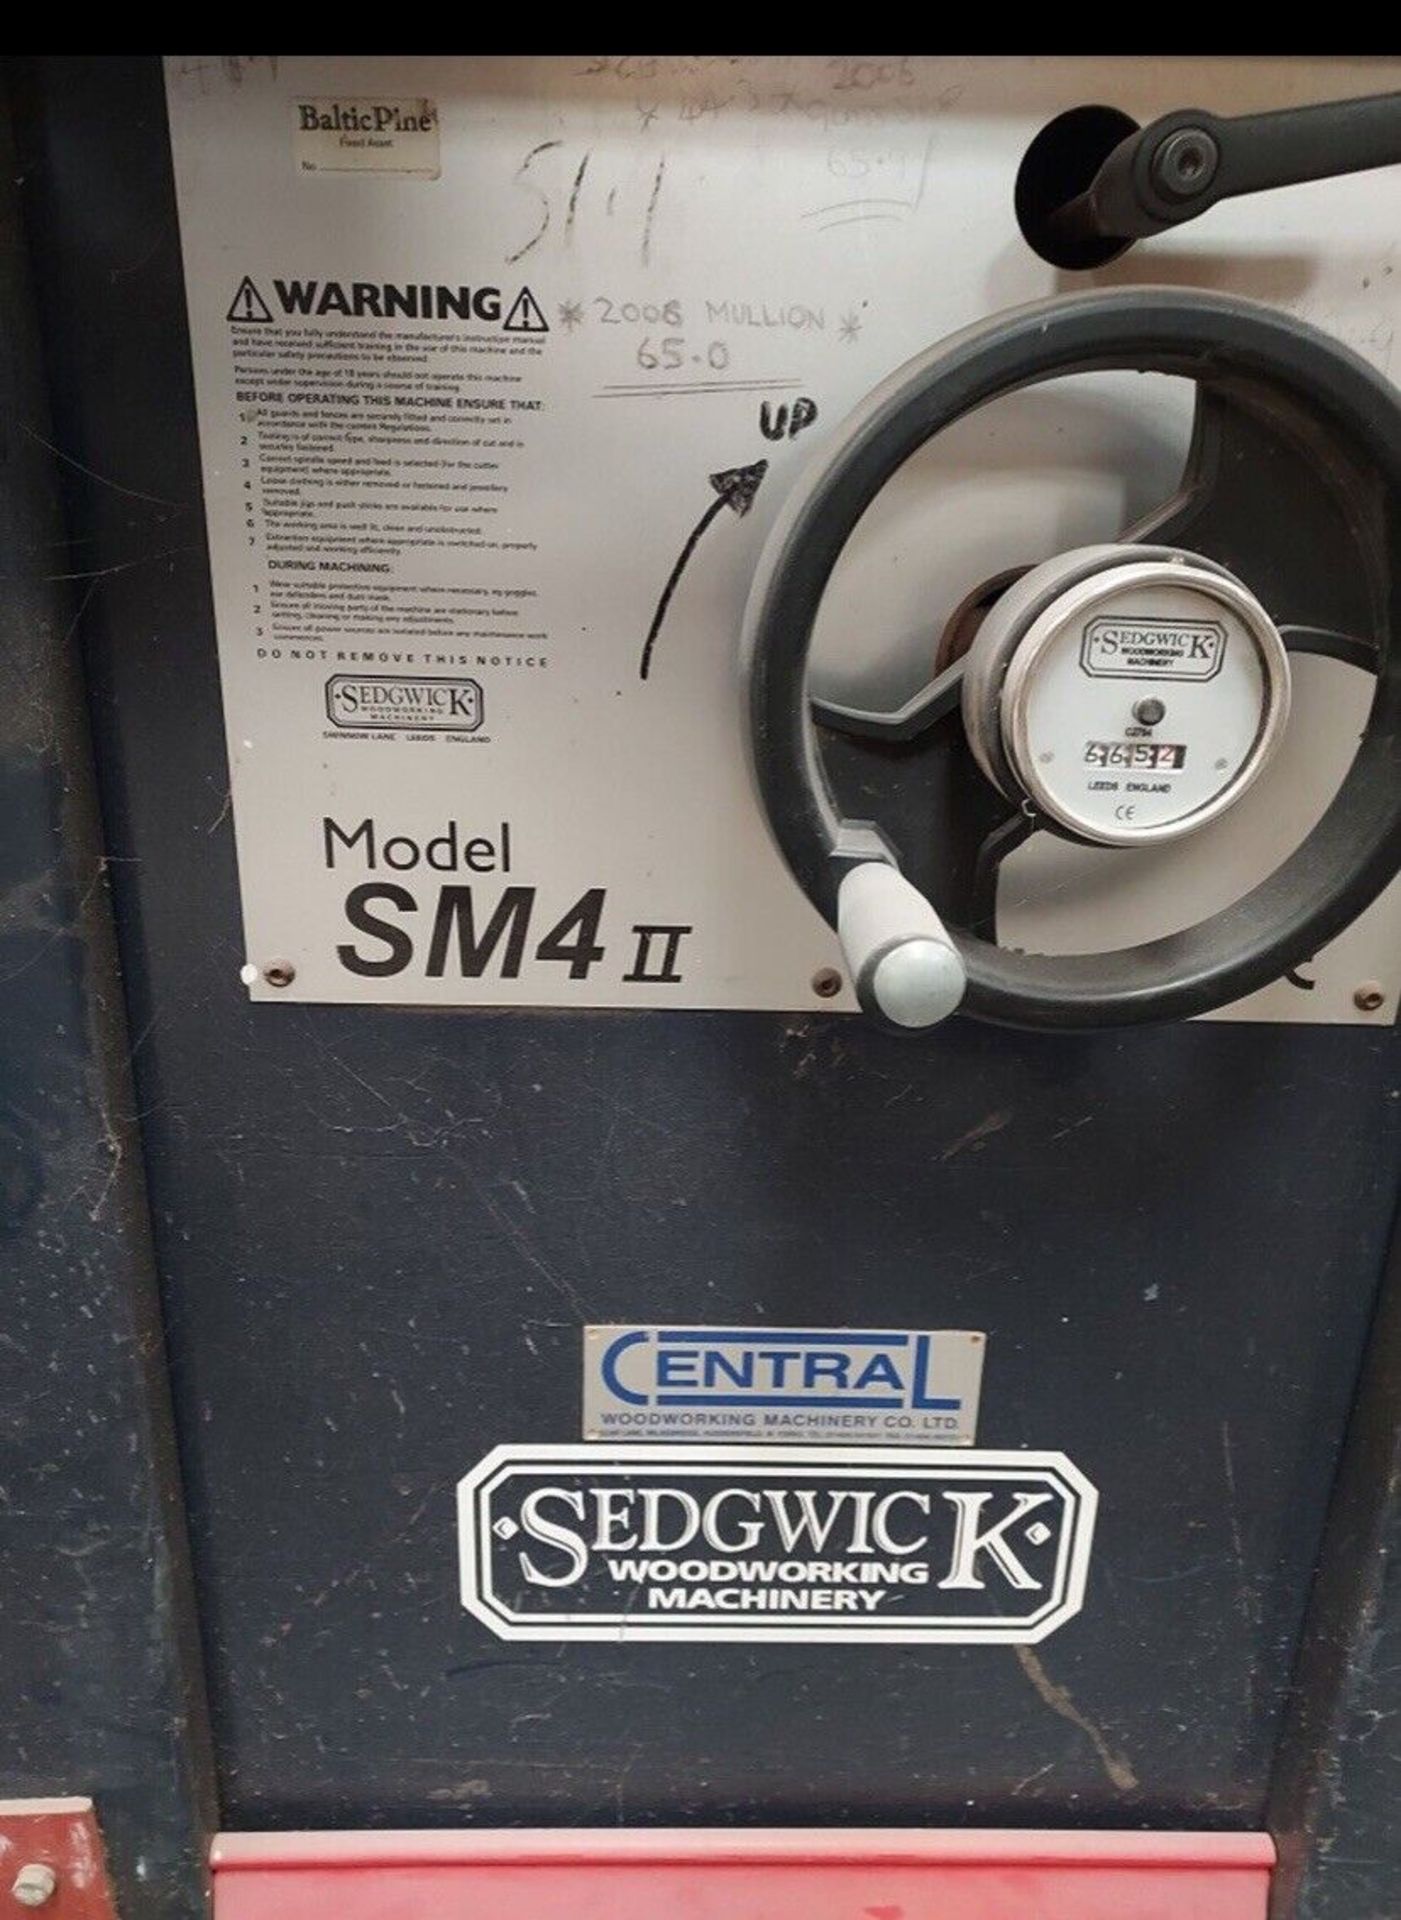 Sedgwick SM4ii Spindle Moulder And Power Feed. - Image 2 of 2